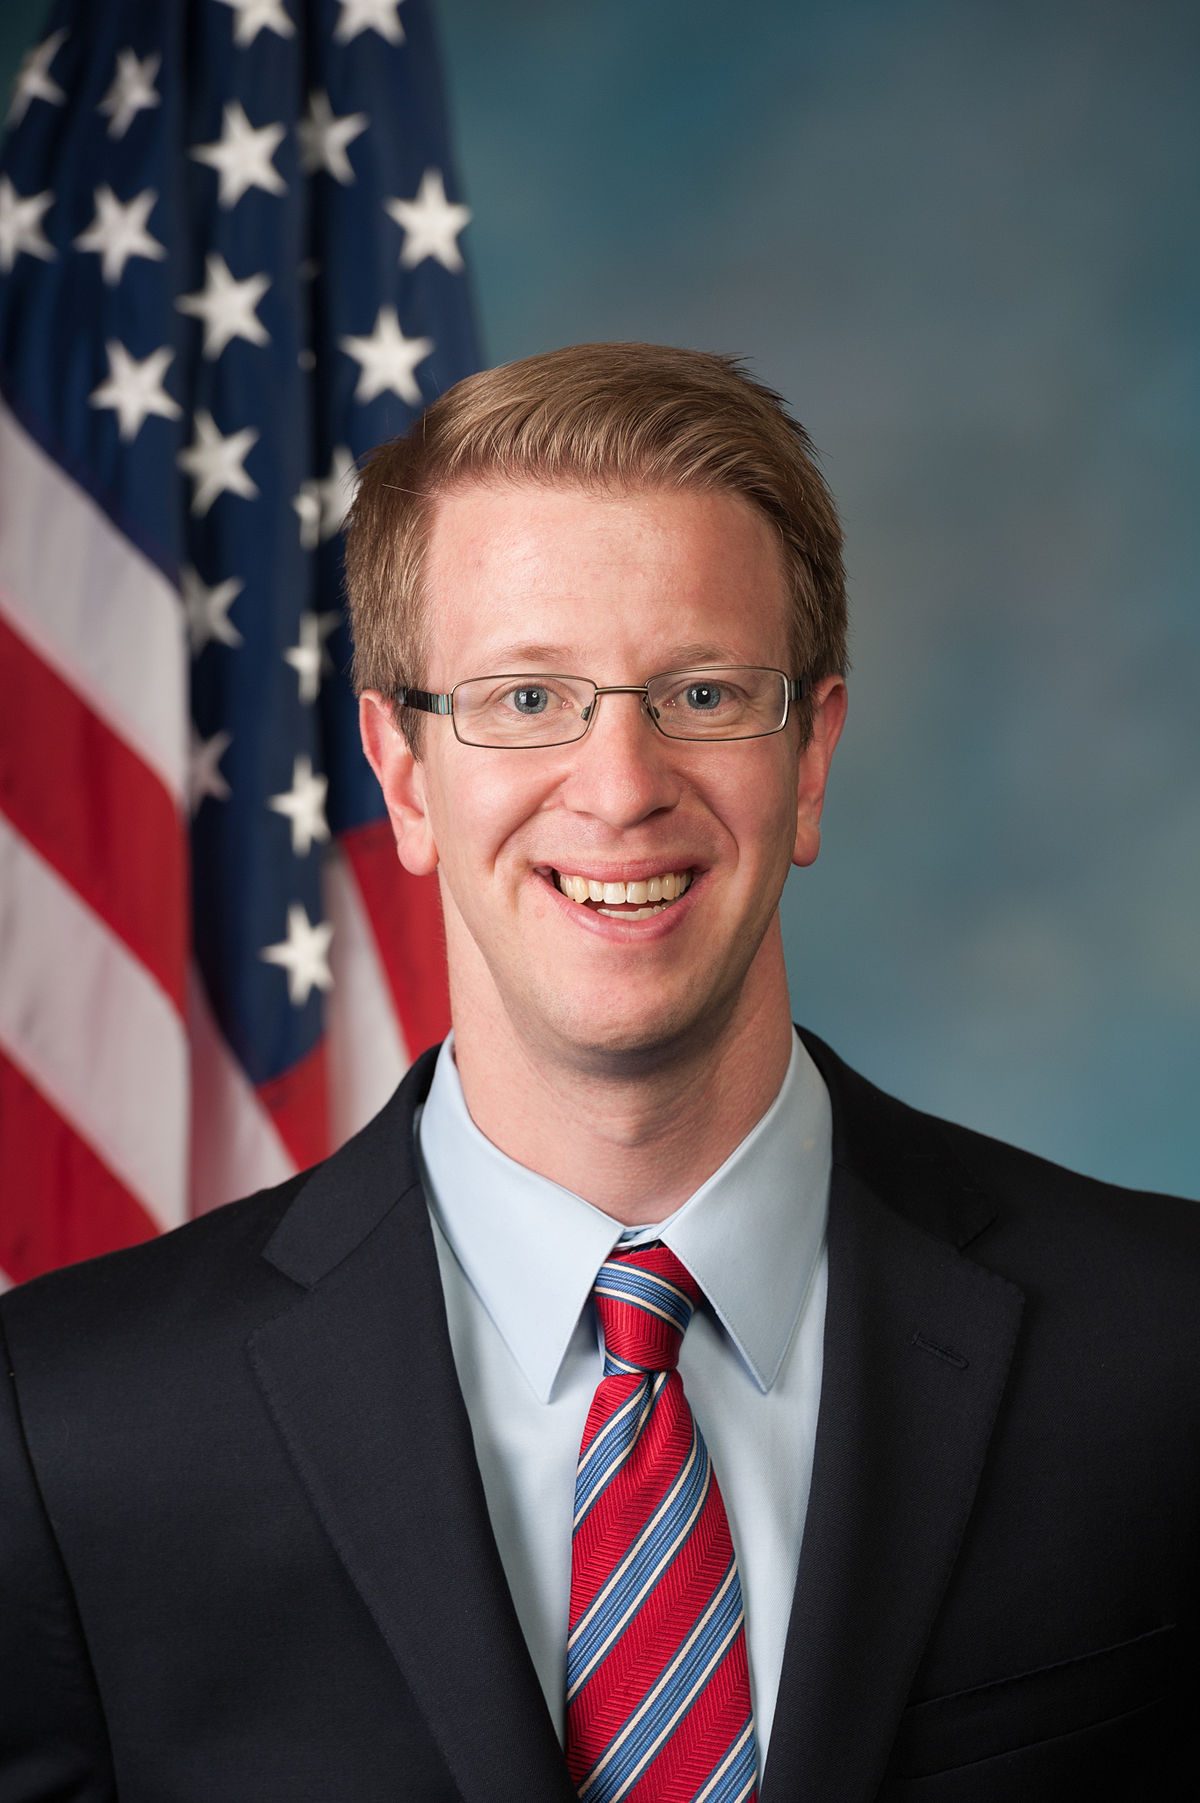 Rep. Derek Kilmer (D-WA) has proposed a solution for temporary federal employees